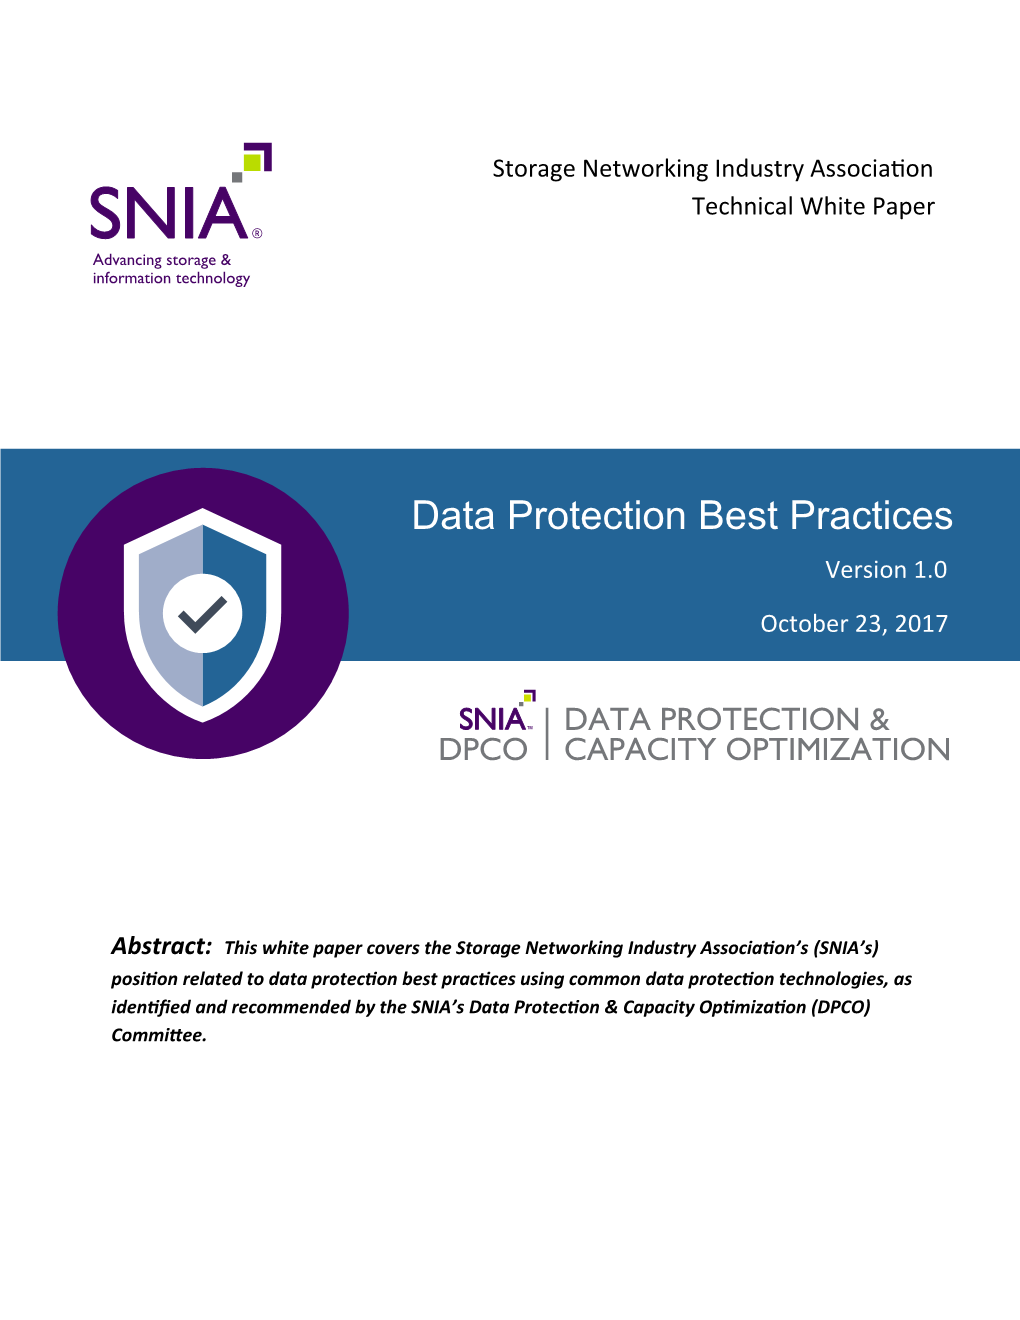 Data Protection Best Practices Version 1.0